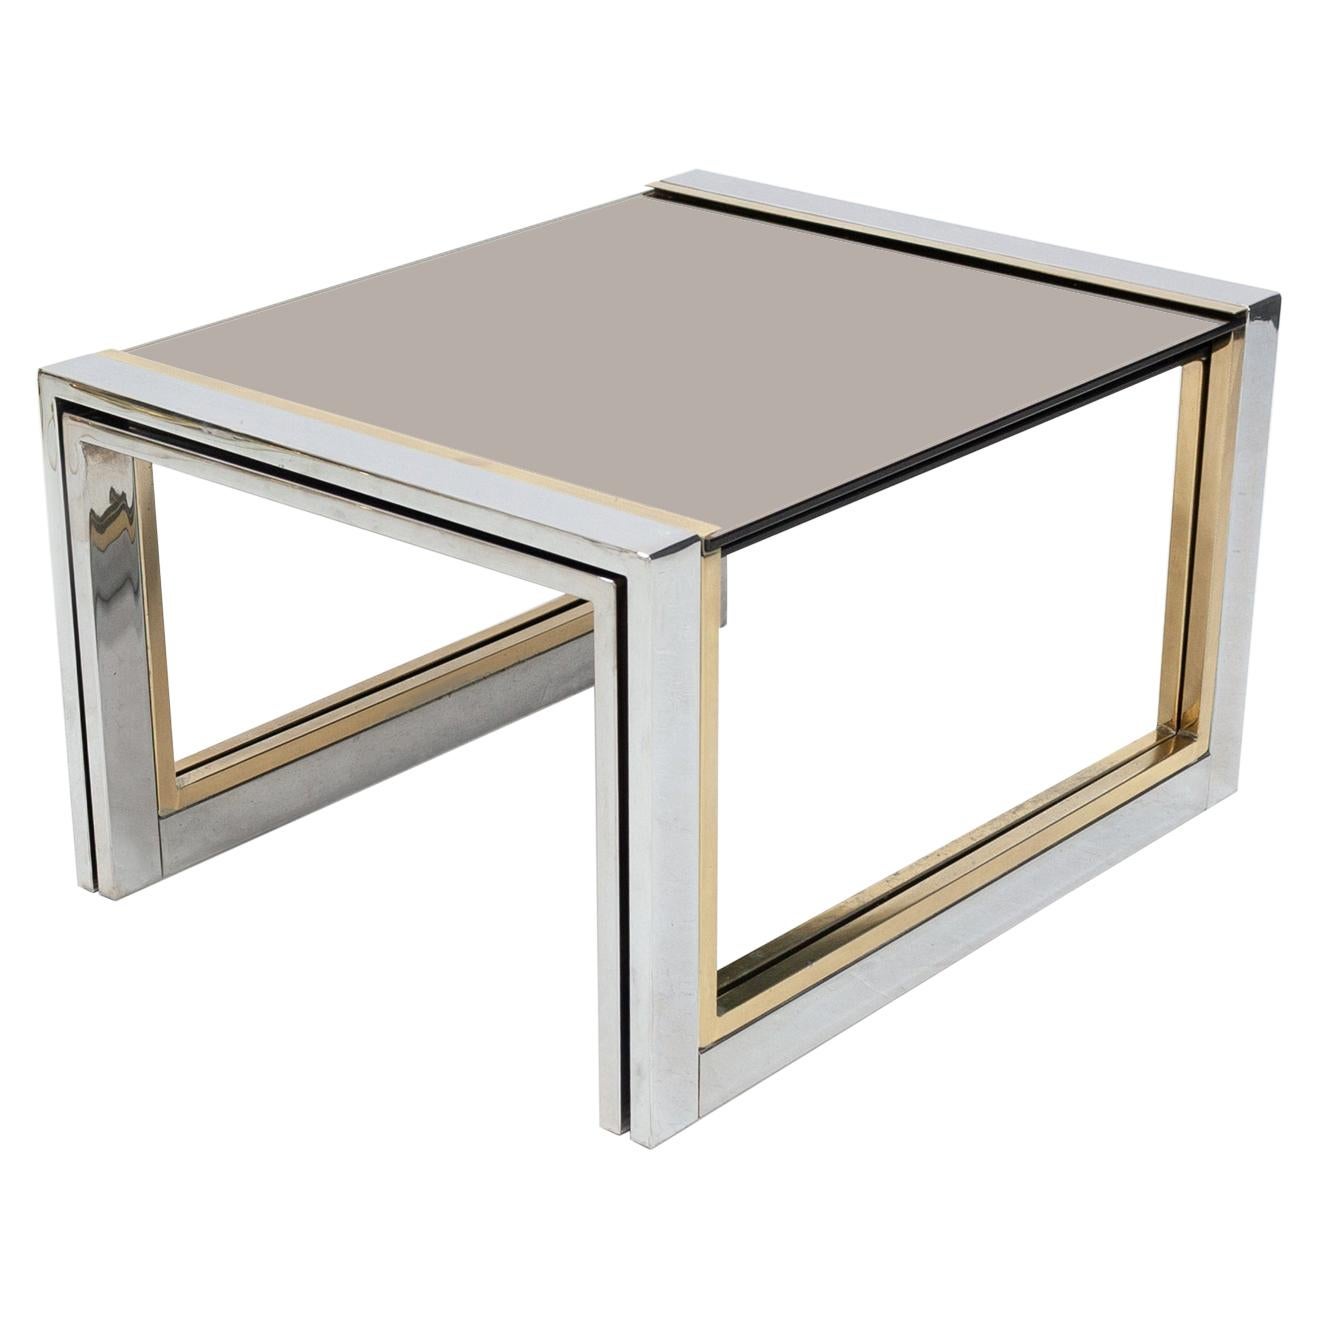 Willy Rizzo Nesting Tables